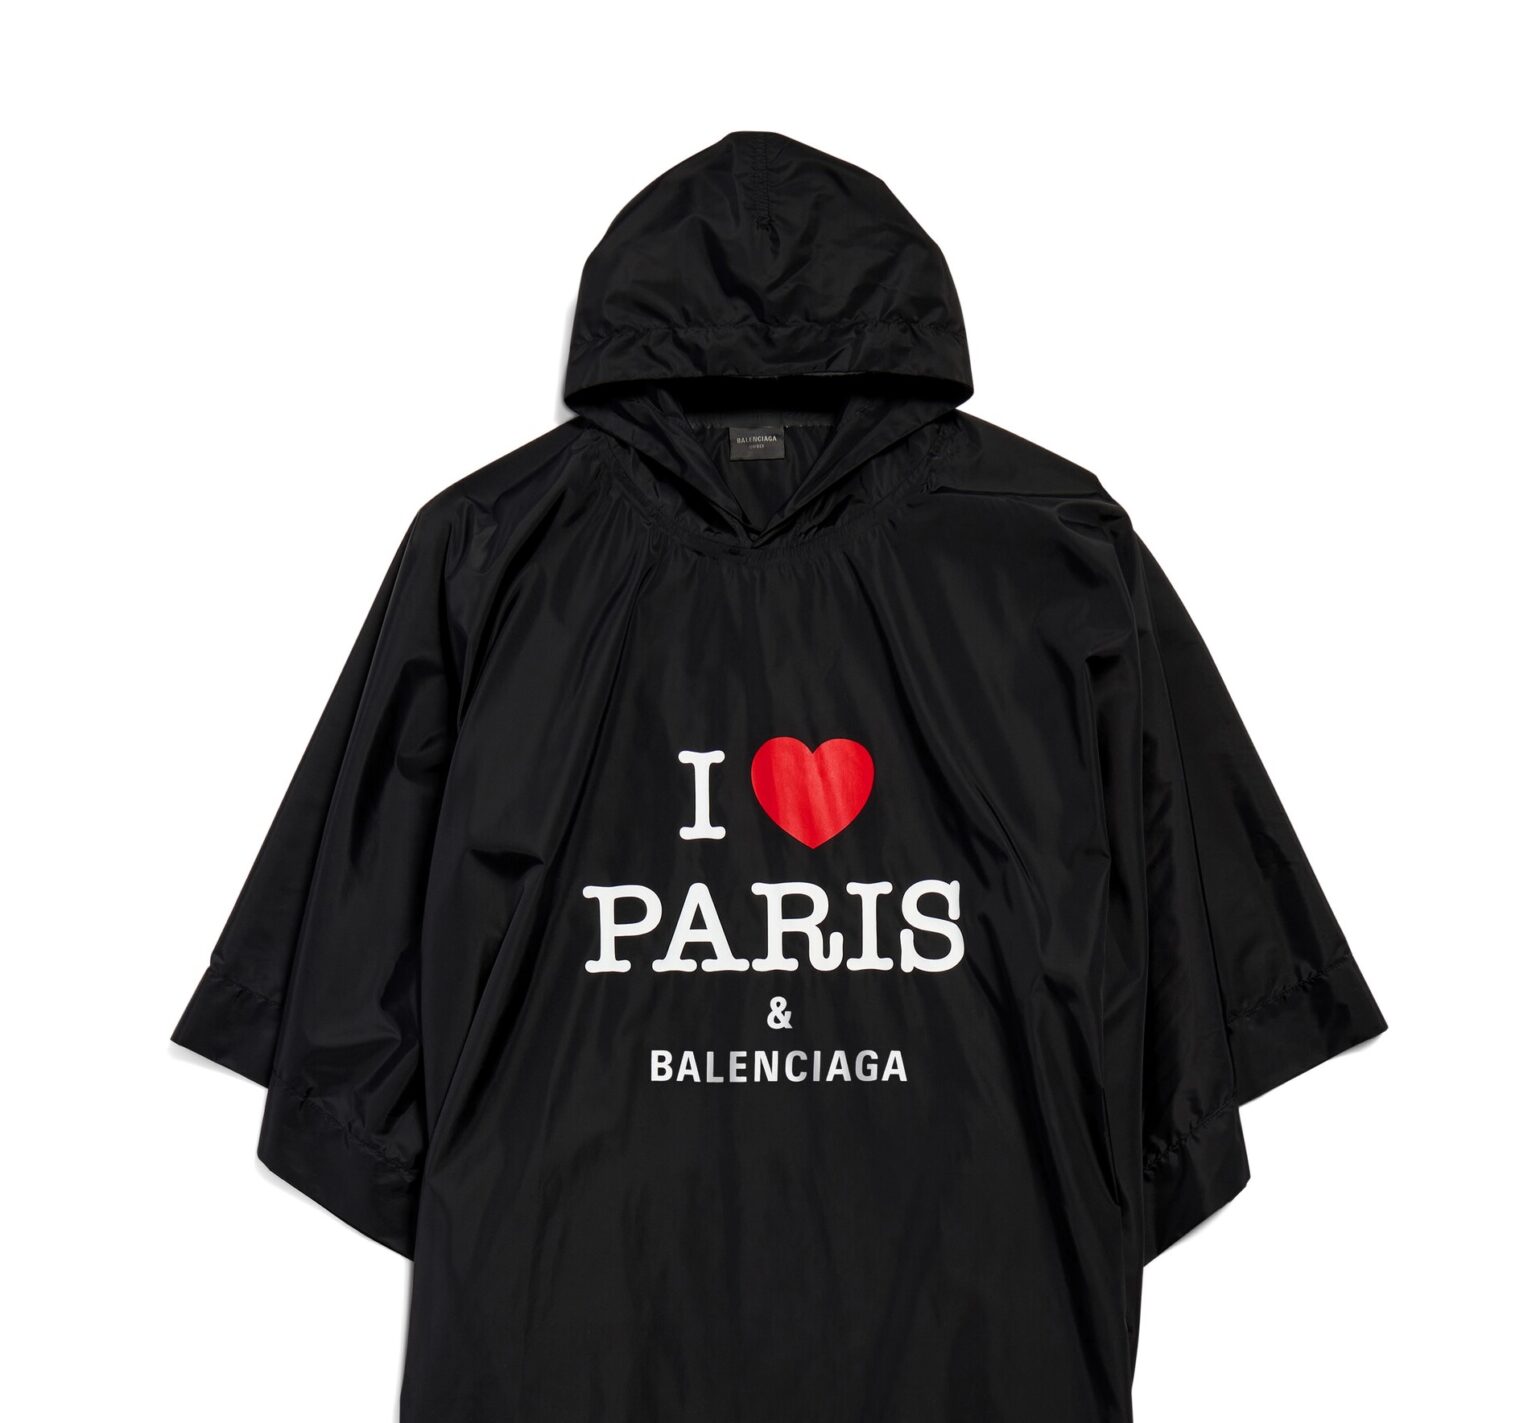 Balenciaga's new 'I love Paris' collection features high-priced tourist souvenirs, including a £1,150 poncho and £70 postcards, mimicking holiday tat with a luxurious twist